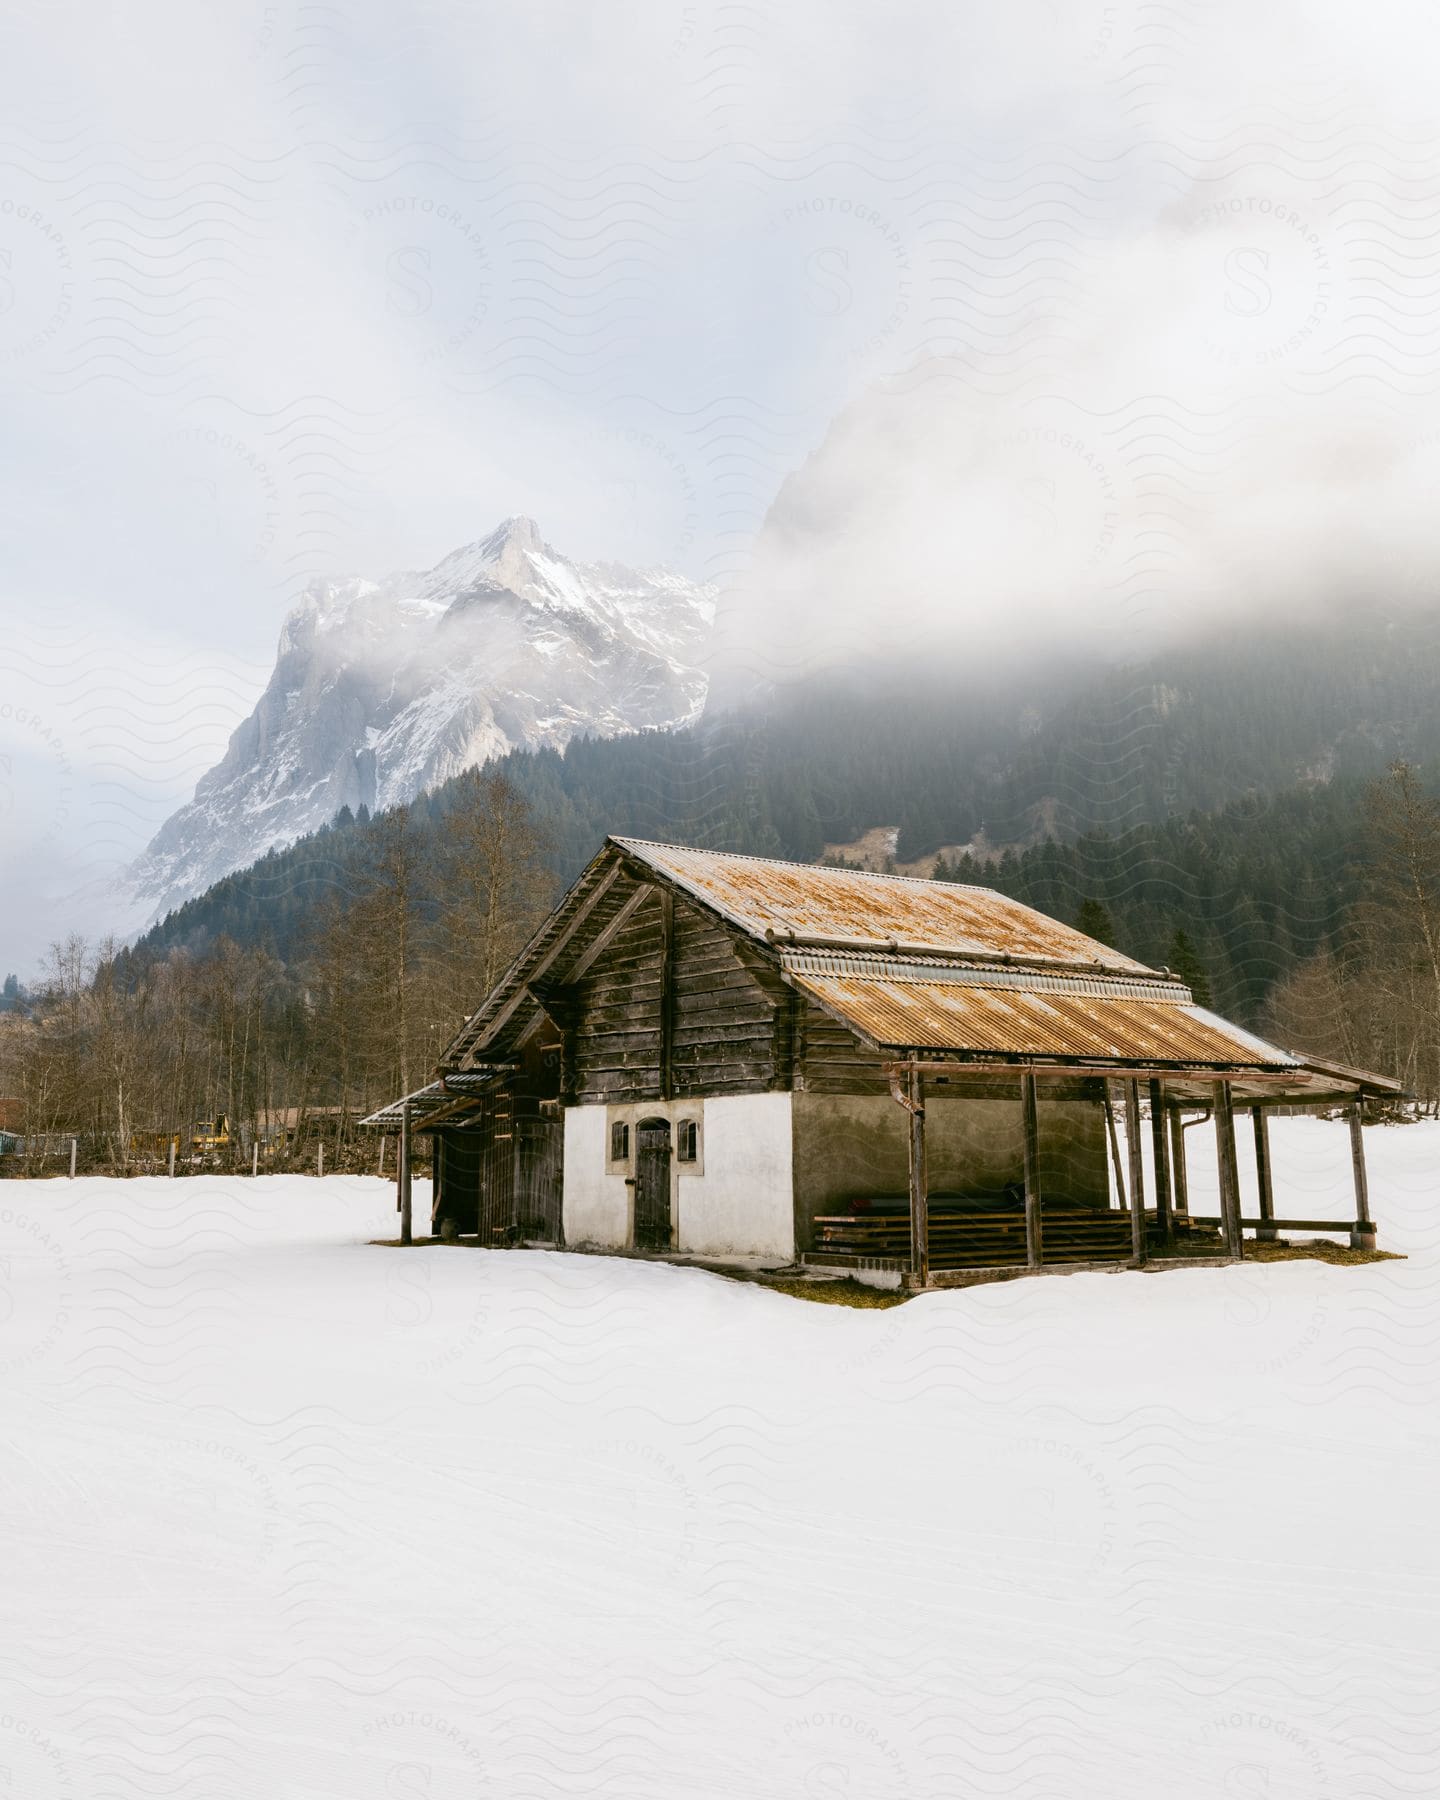 A rustic cabin rests peacefully in the middle of a snowy landscape, with a majestic mountain shrouded in mist in the background.